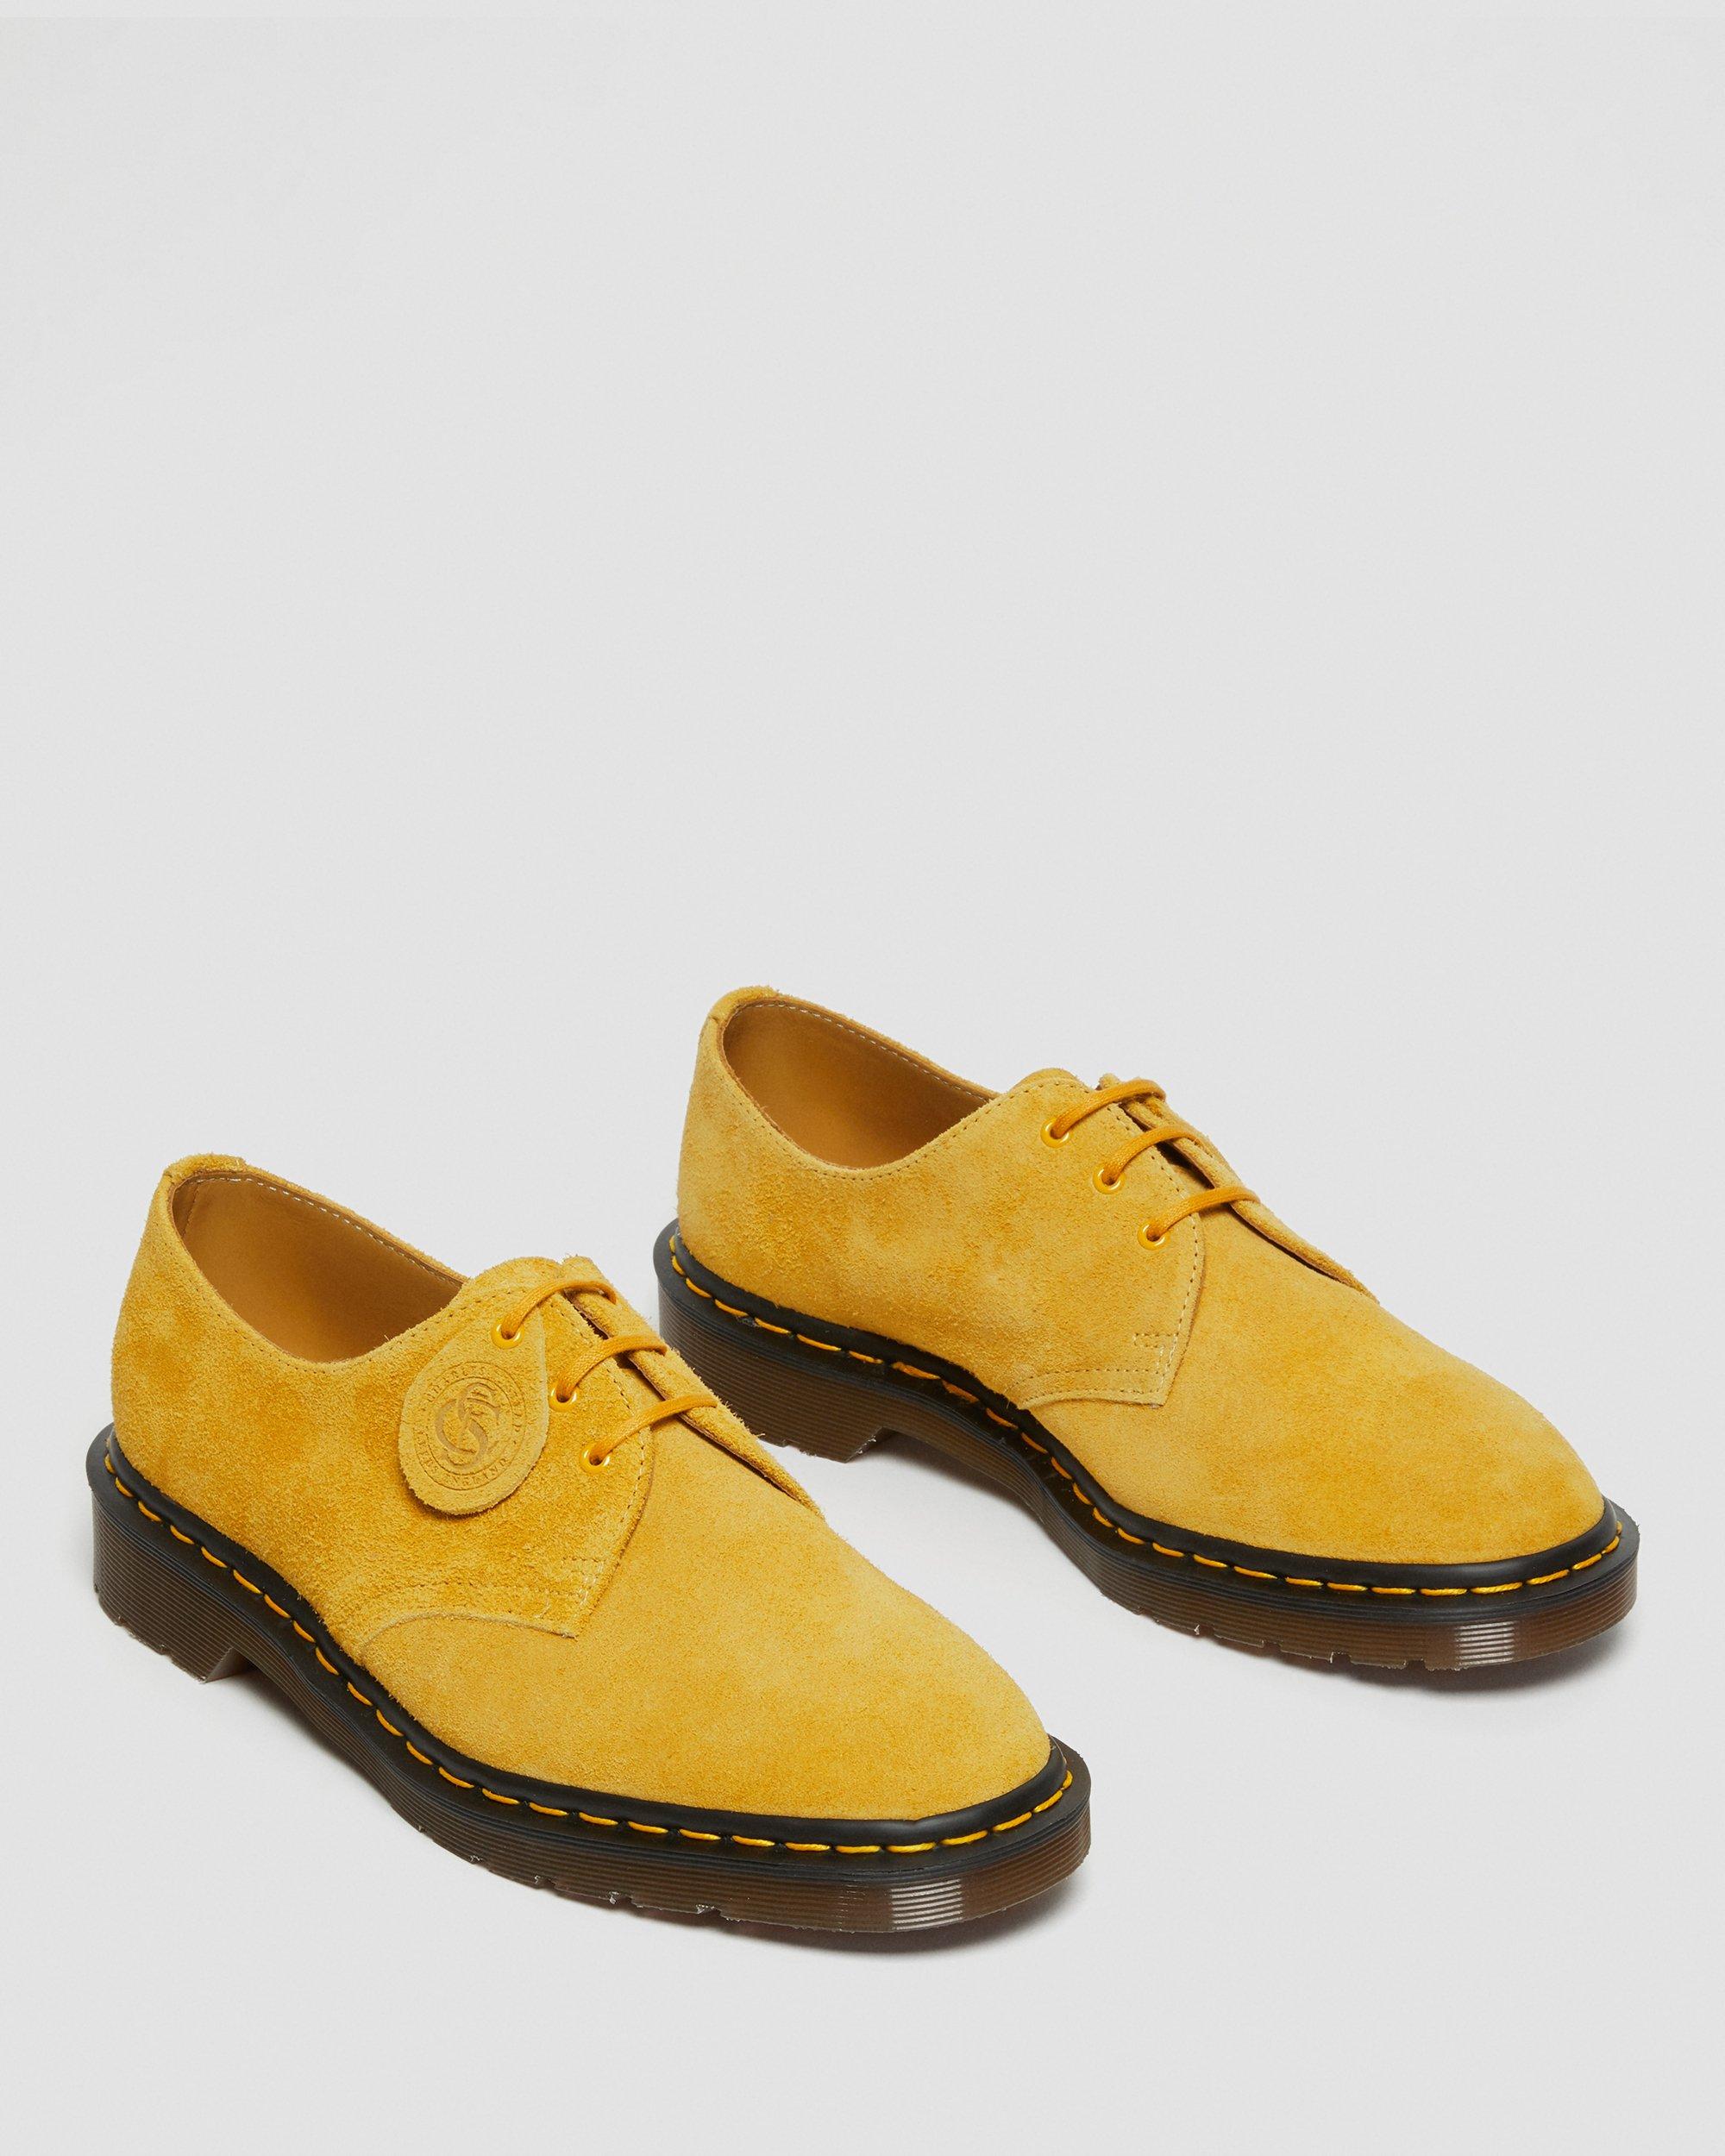 DR MARTENS 1461 Made In England Suede Oxford Shoes